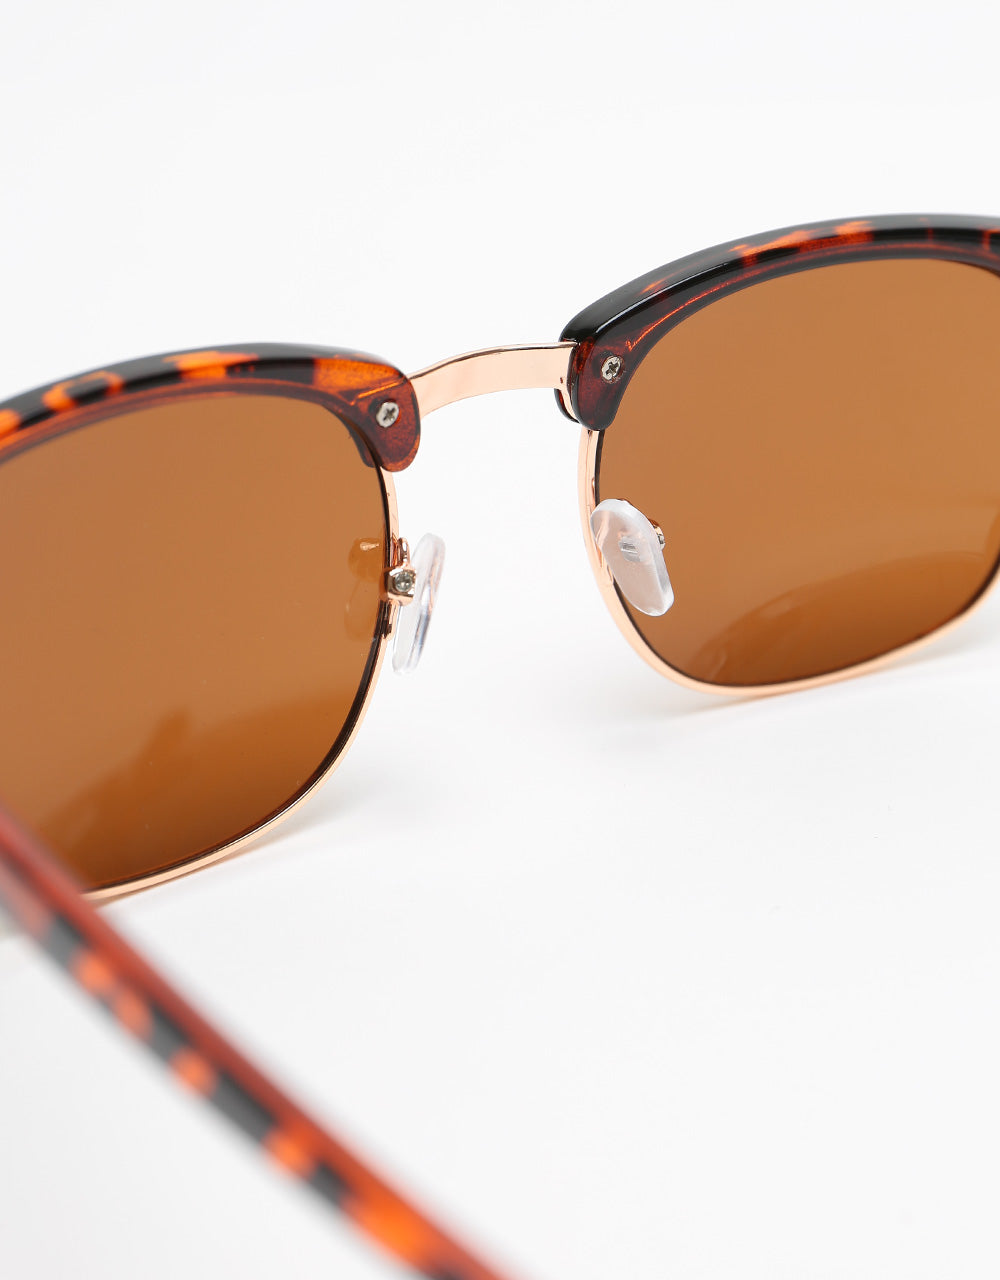 Route One New Clubmaster Sunglasses - Tortoise Brown Lens